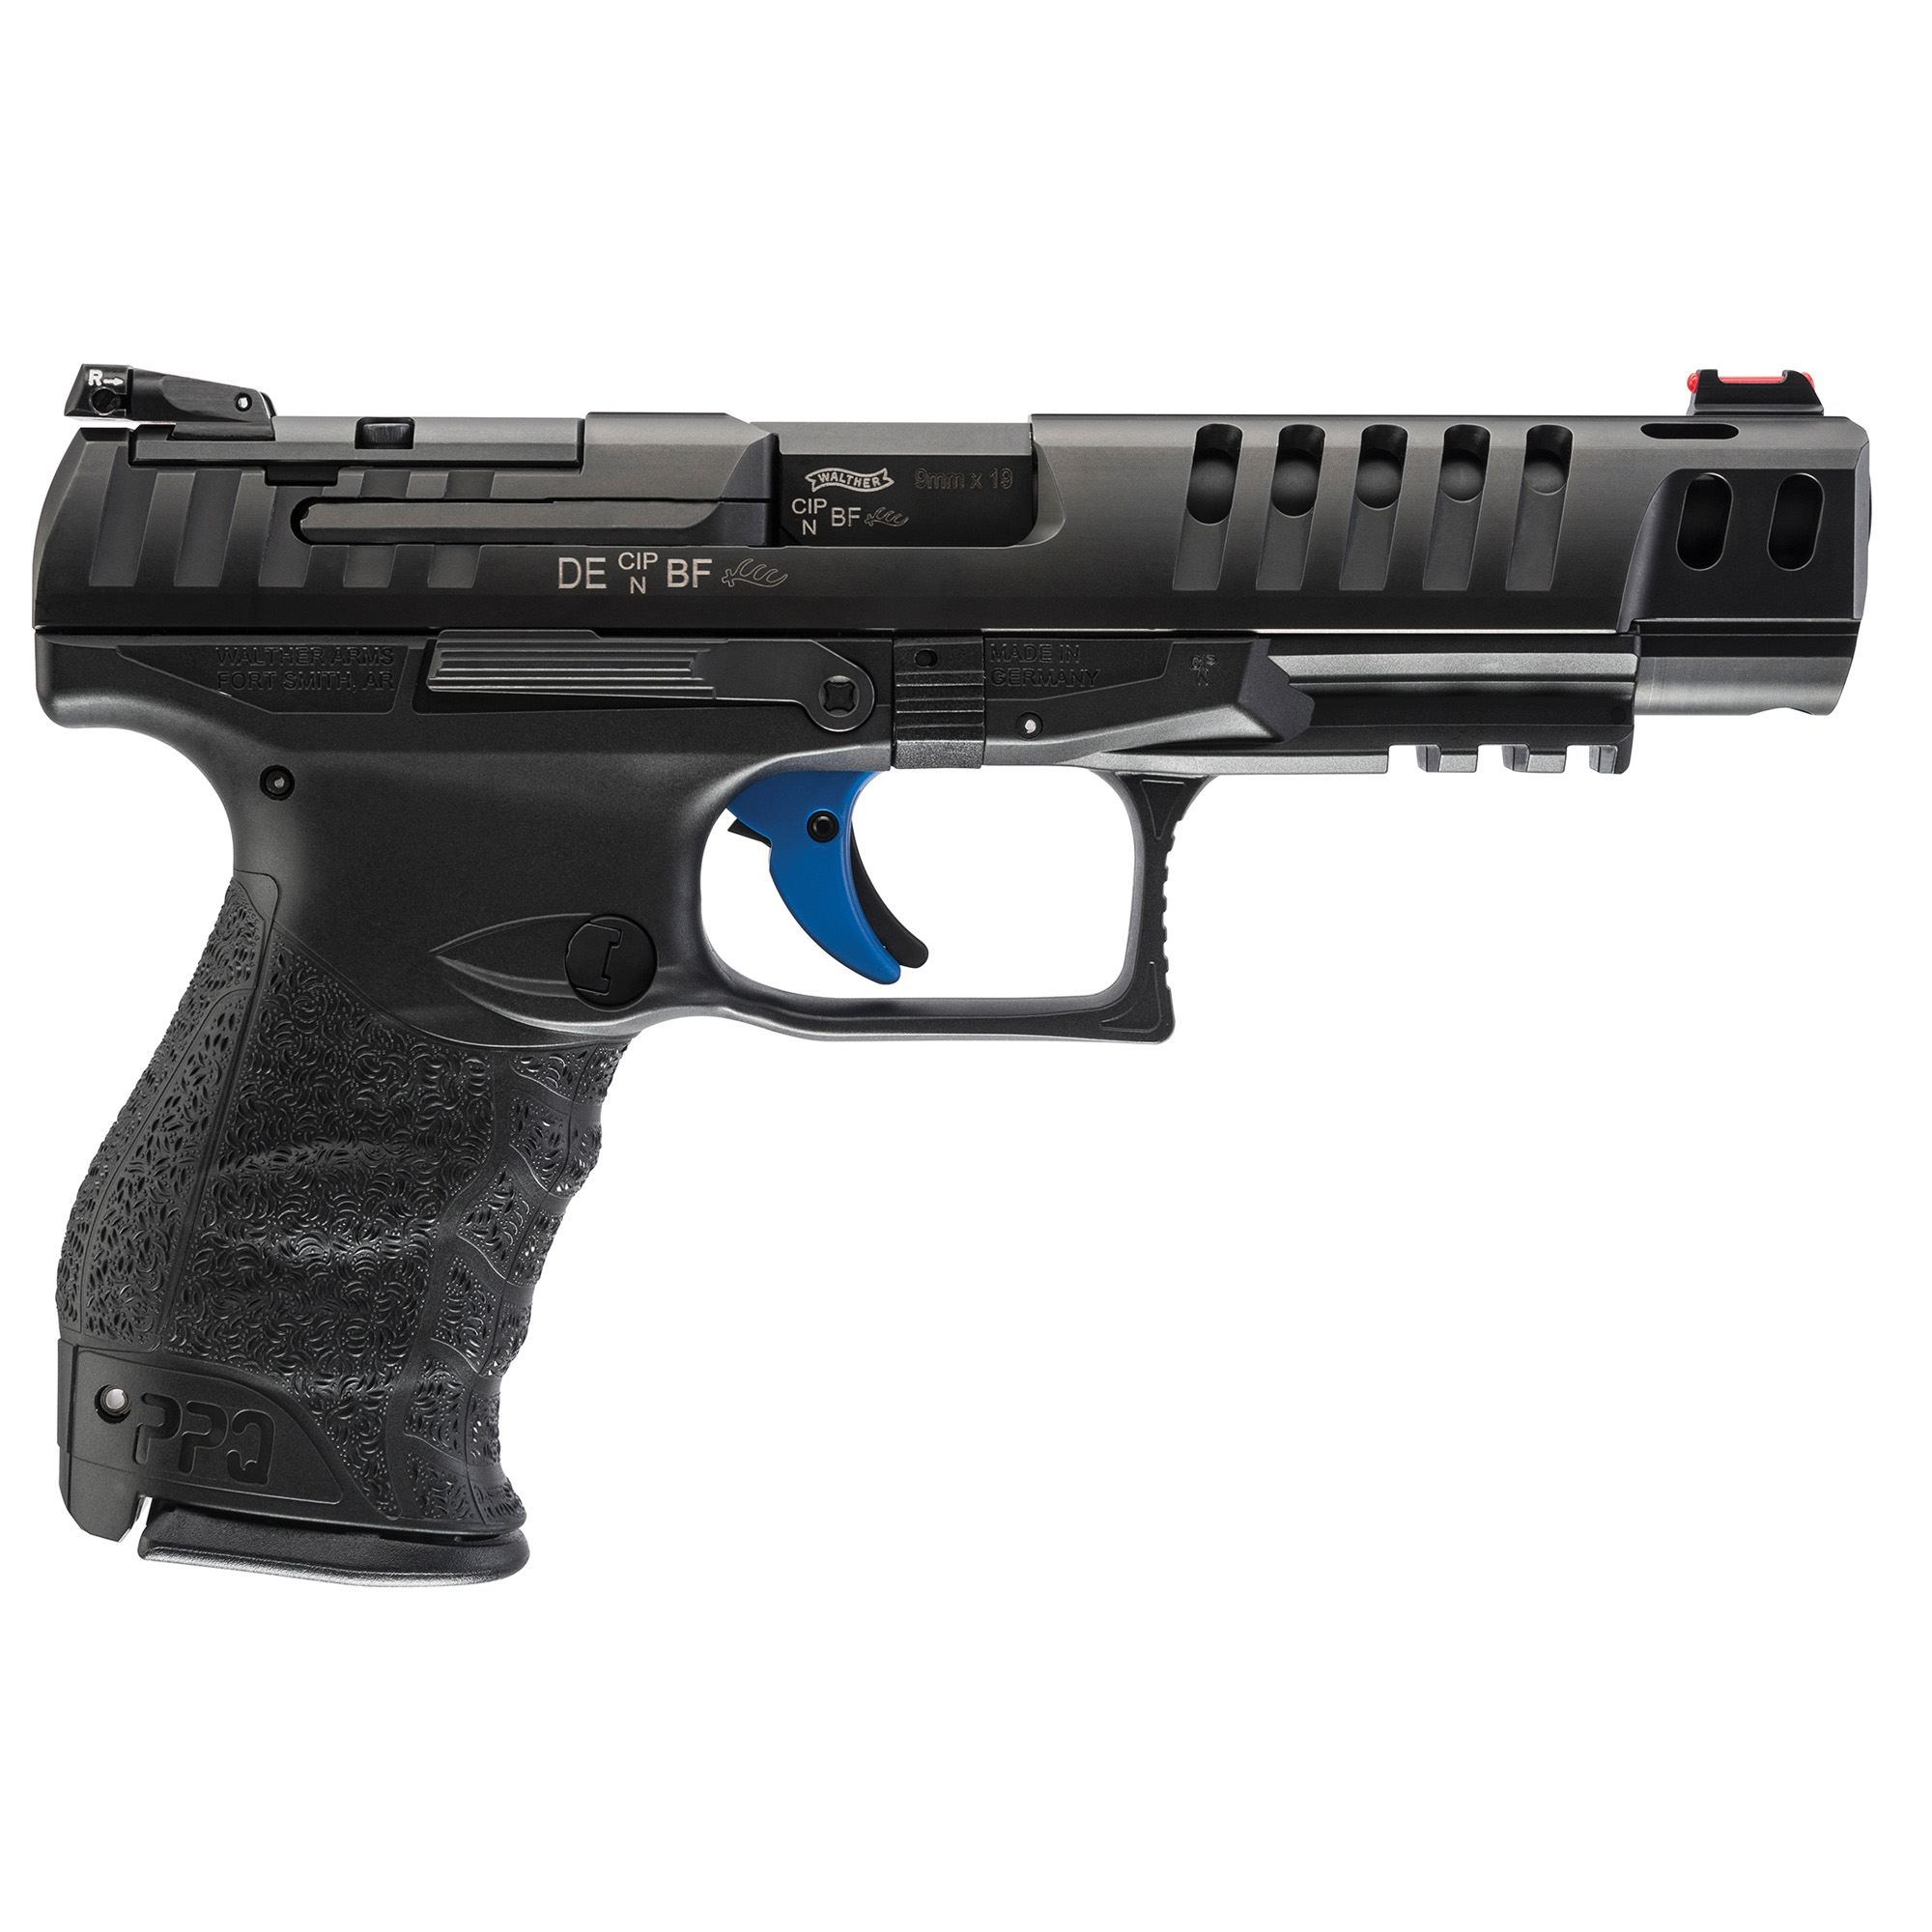 <BODY><P STYLE="FONT-FAMILY:ARIAL;"><P ALIGN="LEFT">
Walther<br>
Model:Q5<br>
Action: S/A<br>
Caliber: .9mml<br>
Barrel Length: 5"<br>
Finish/Color: Matte<br>
Sights: Fixed<br>
Capacity: 5Rd<br>Adjustable Rear Sight, Fiber Optic Front
<br>Adjustable Rear Sight, Fiber Optic Front, 10Rd, 3 Magazines
<H1 STYLE="COLOR:GREEN">$799.95</H1></P></BODY></HTML>